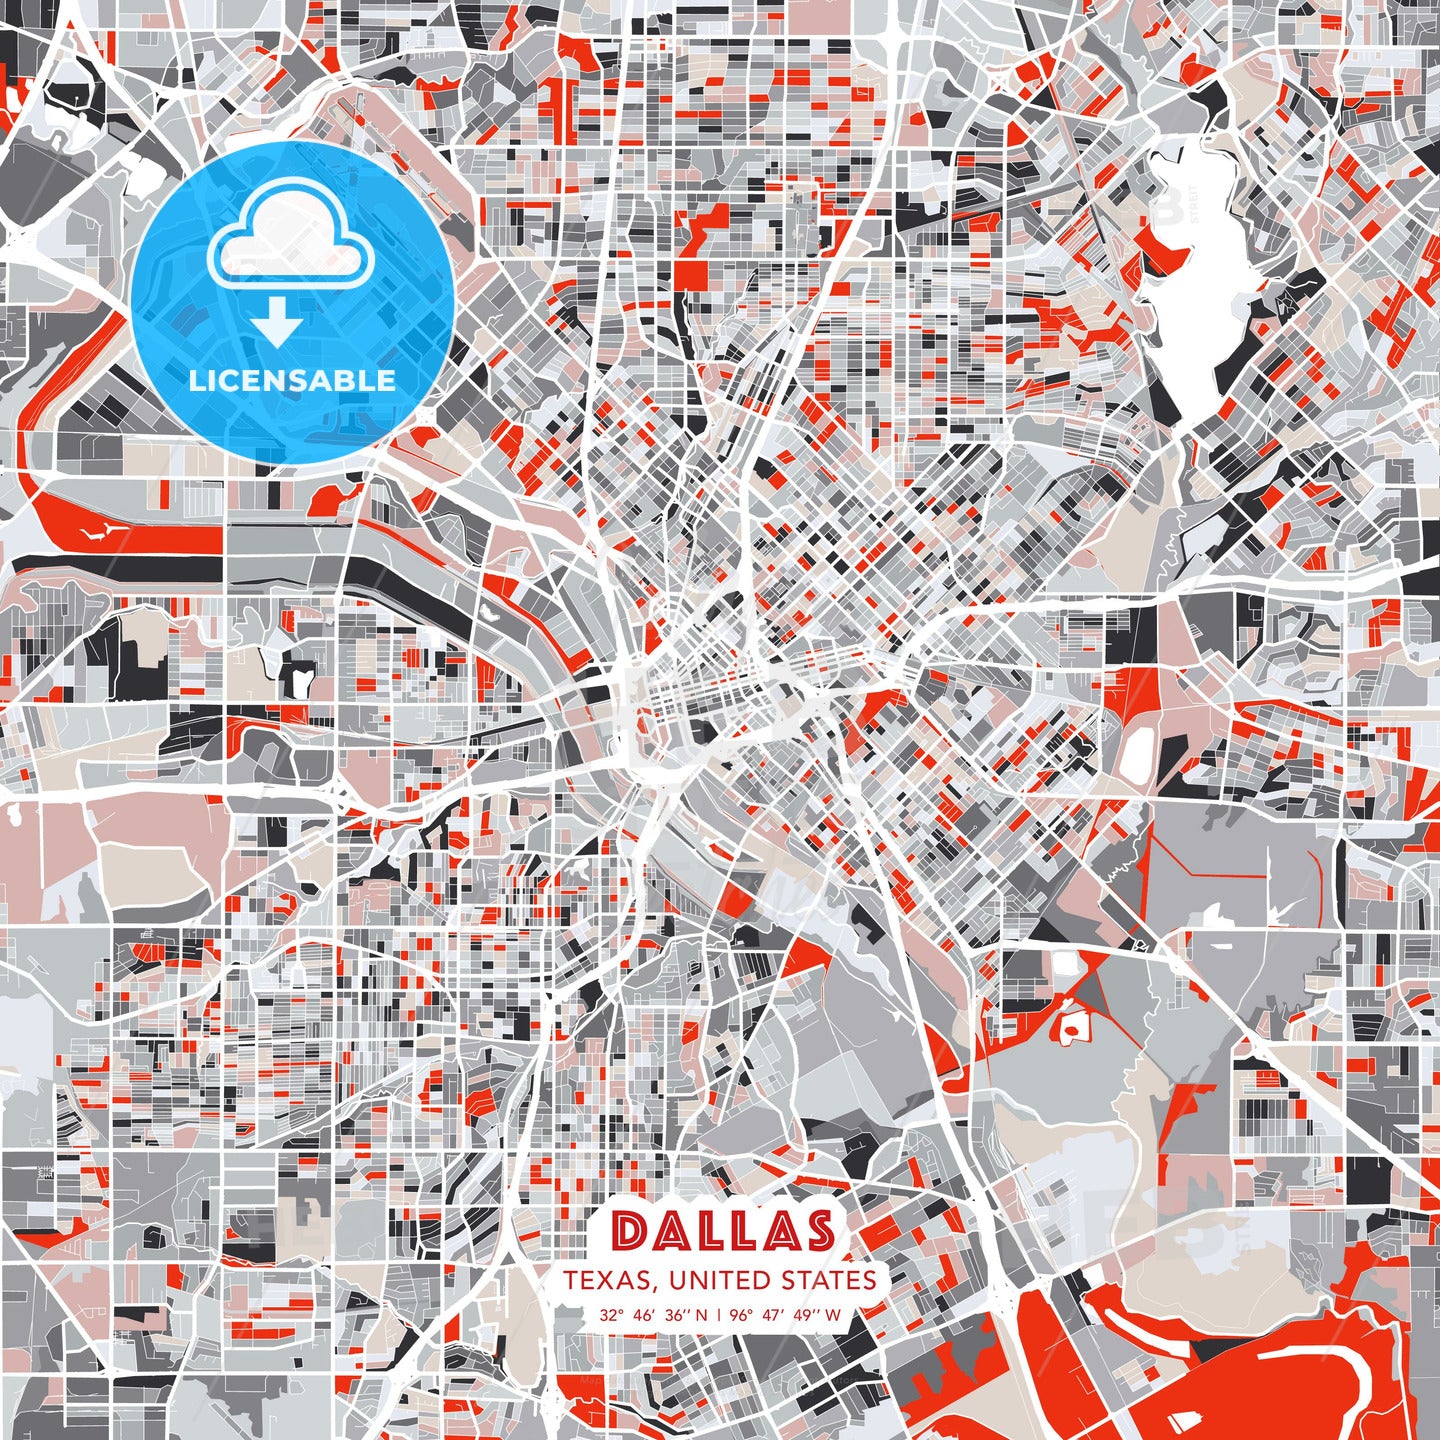 Dallas, Texas, United States, modern map - HEBSTREITS Sketches